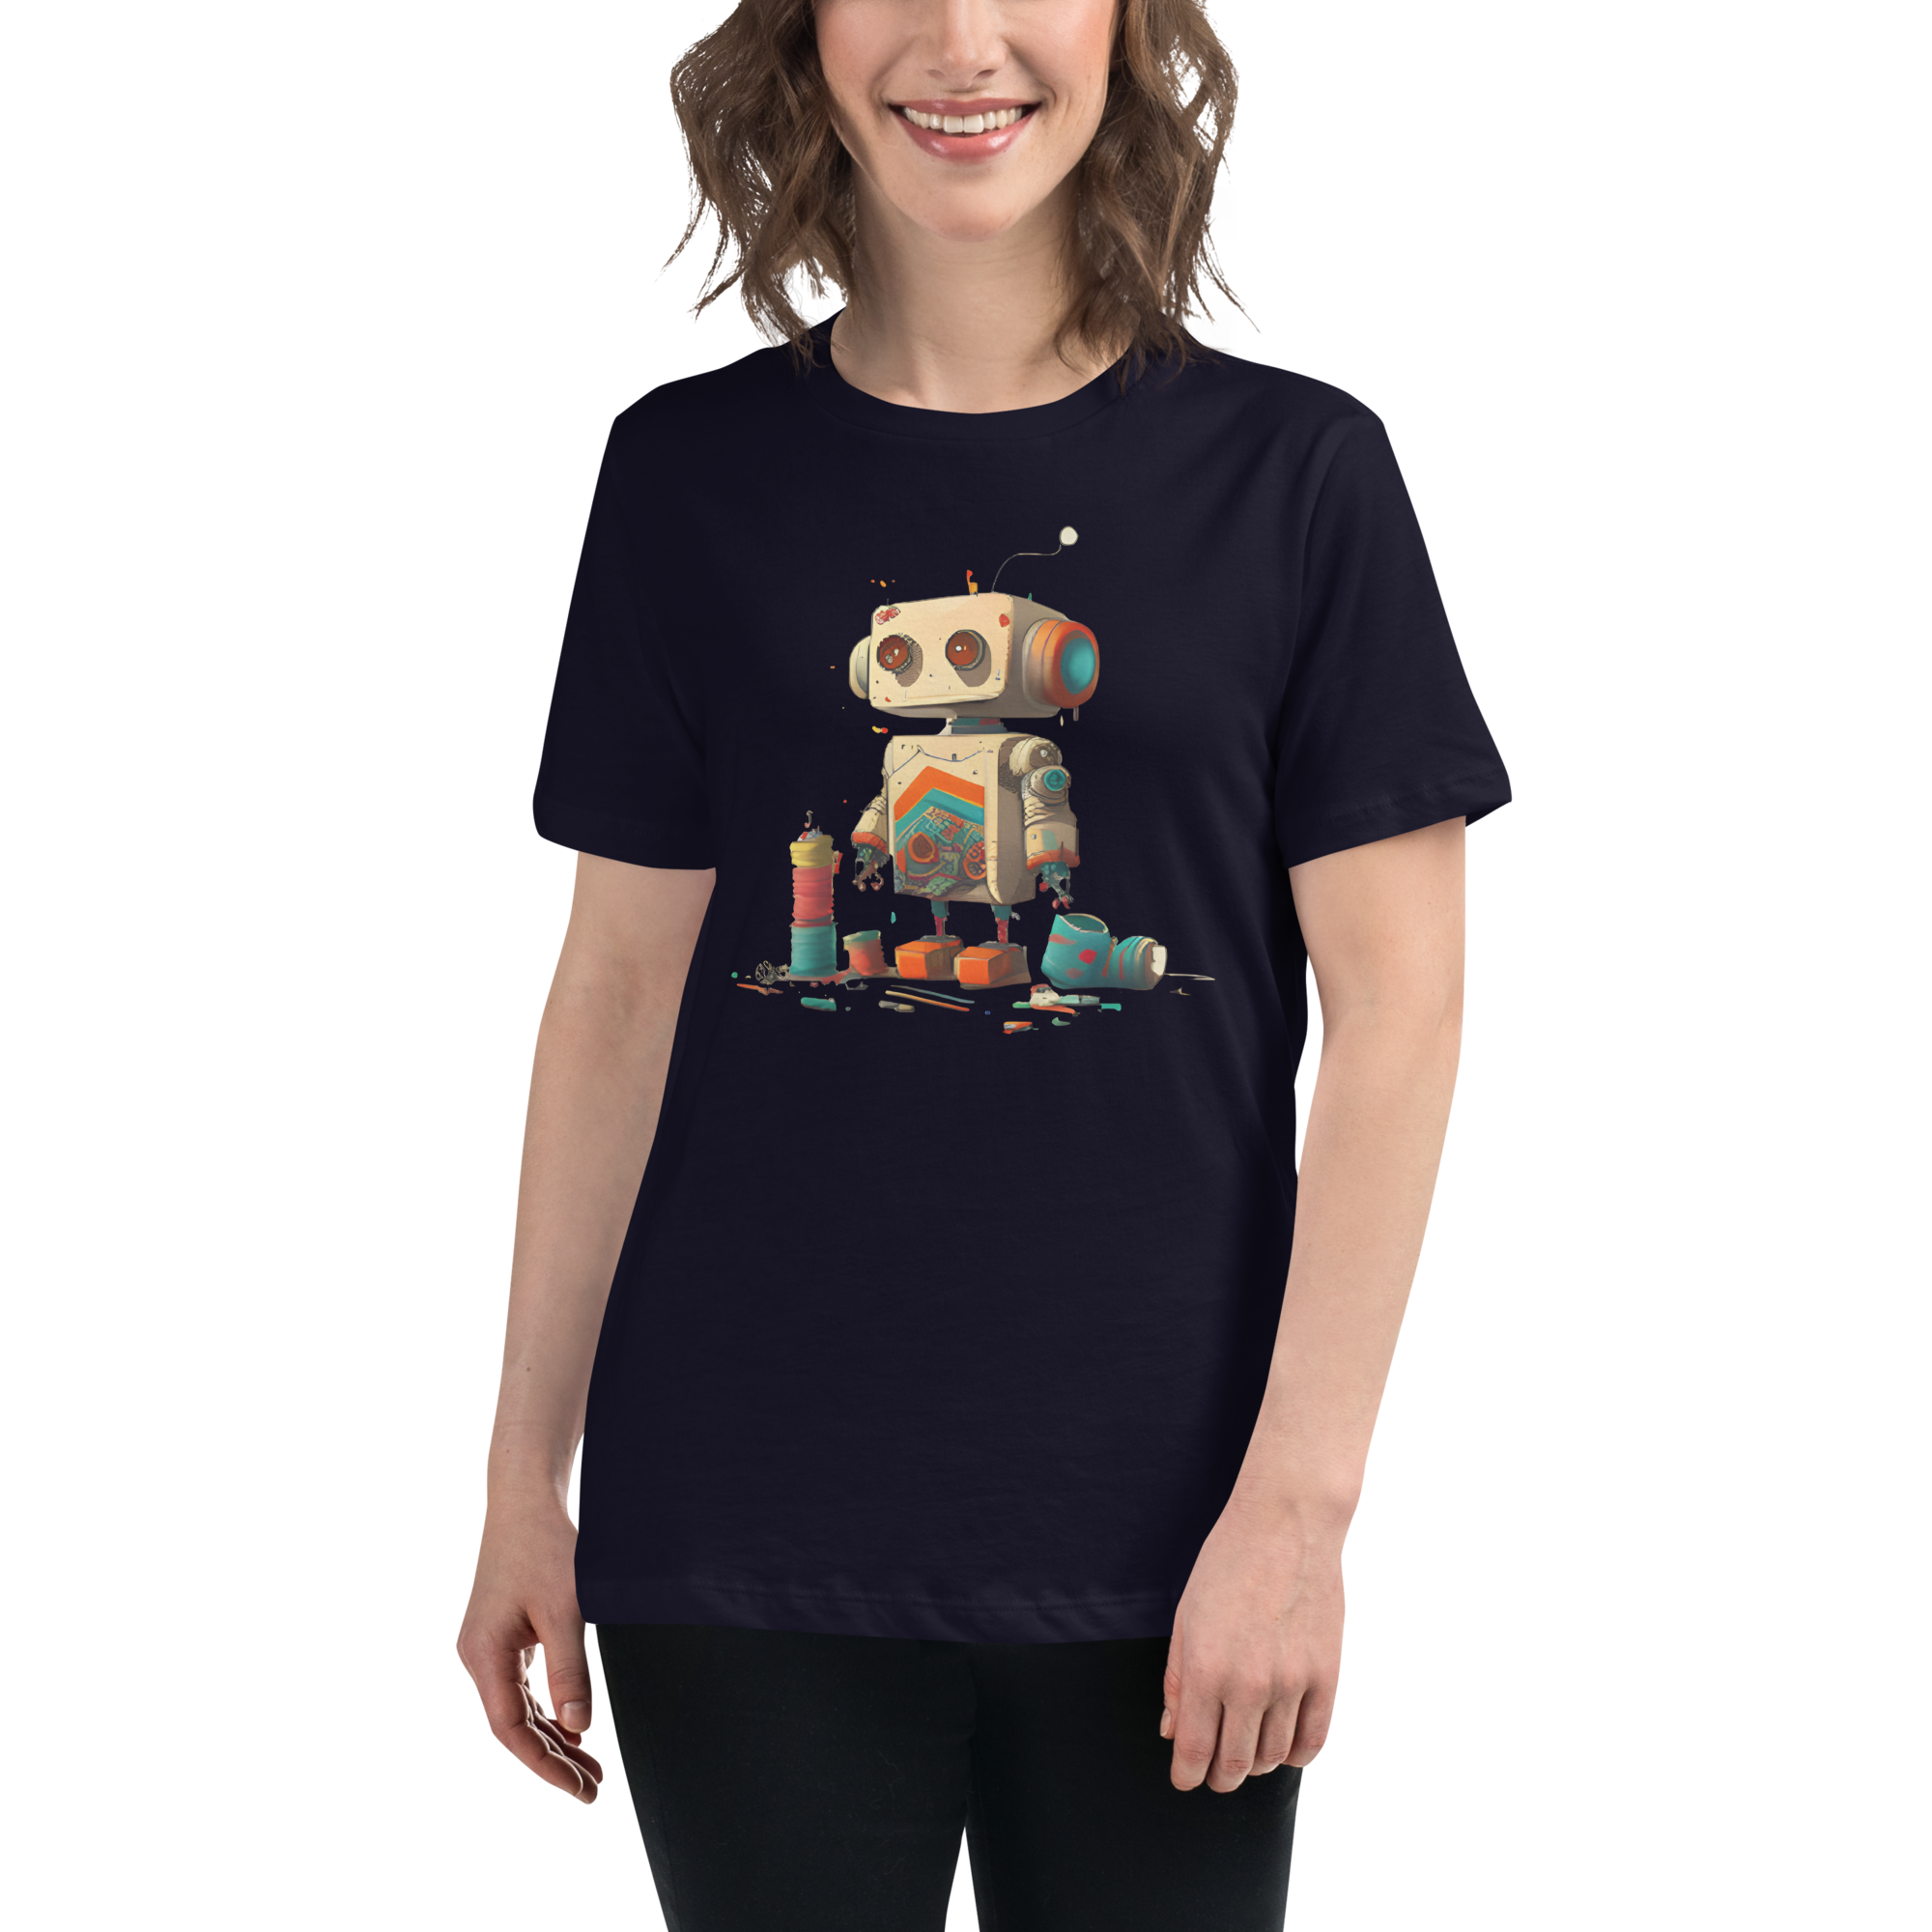 Women's relaxed t-shirt with small Robot design